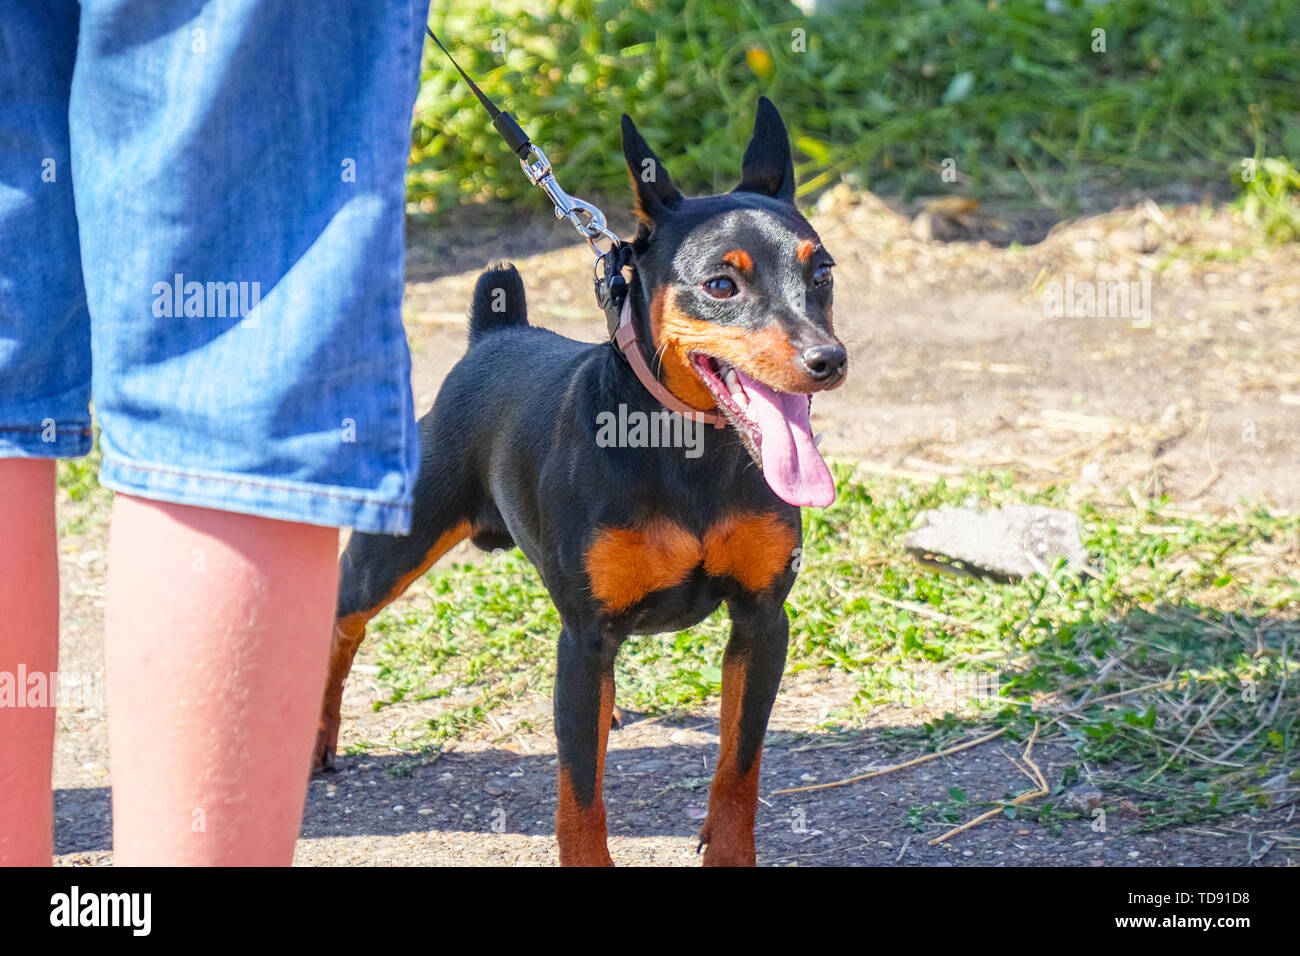 Miniature Pinscher dog on a leash with the owner Stock Photo